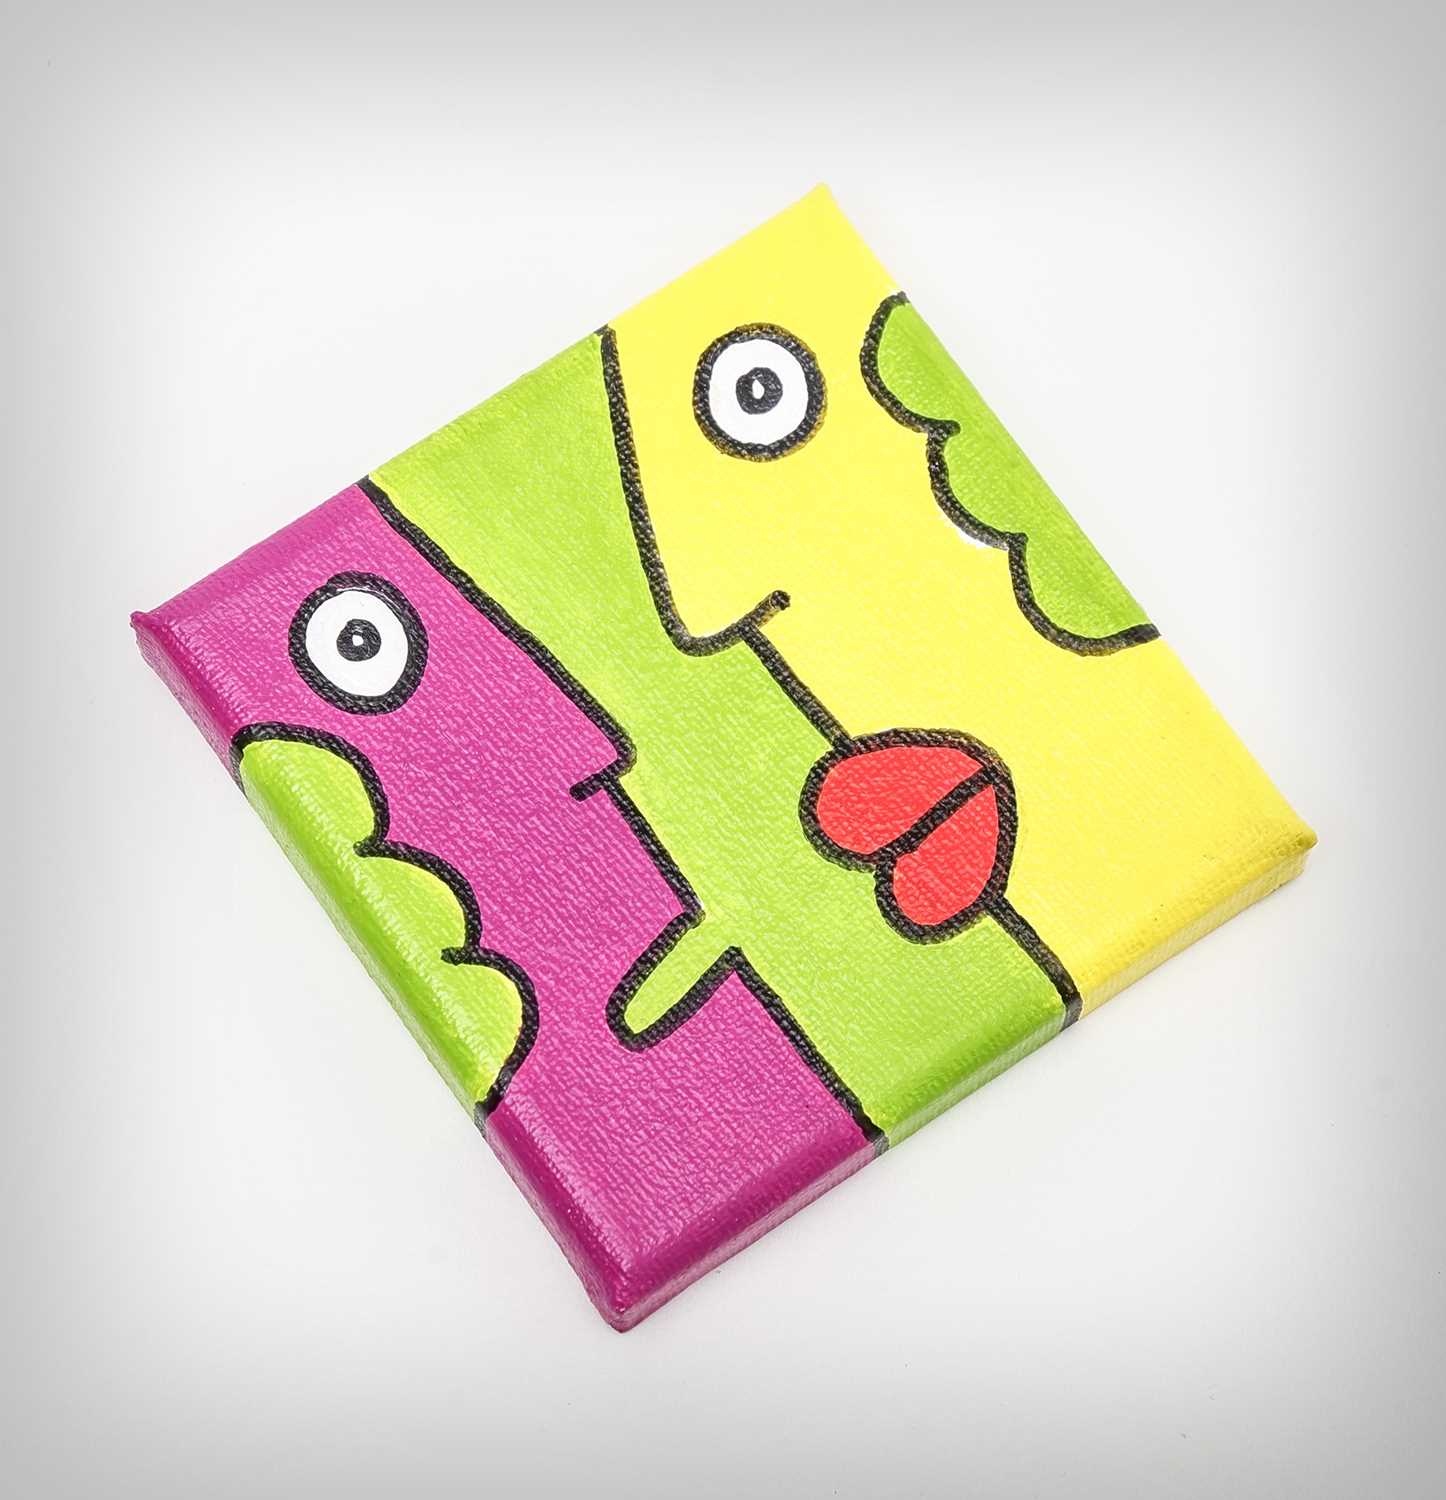 Lot 135 - Thierry Noir (French 1958-), 'Untitled (Mini Heads Canvas)', 2012